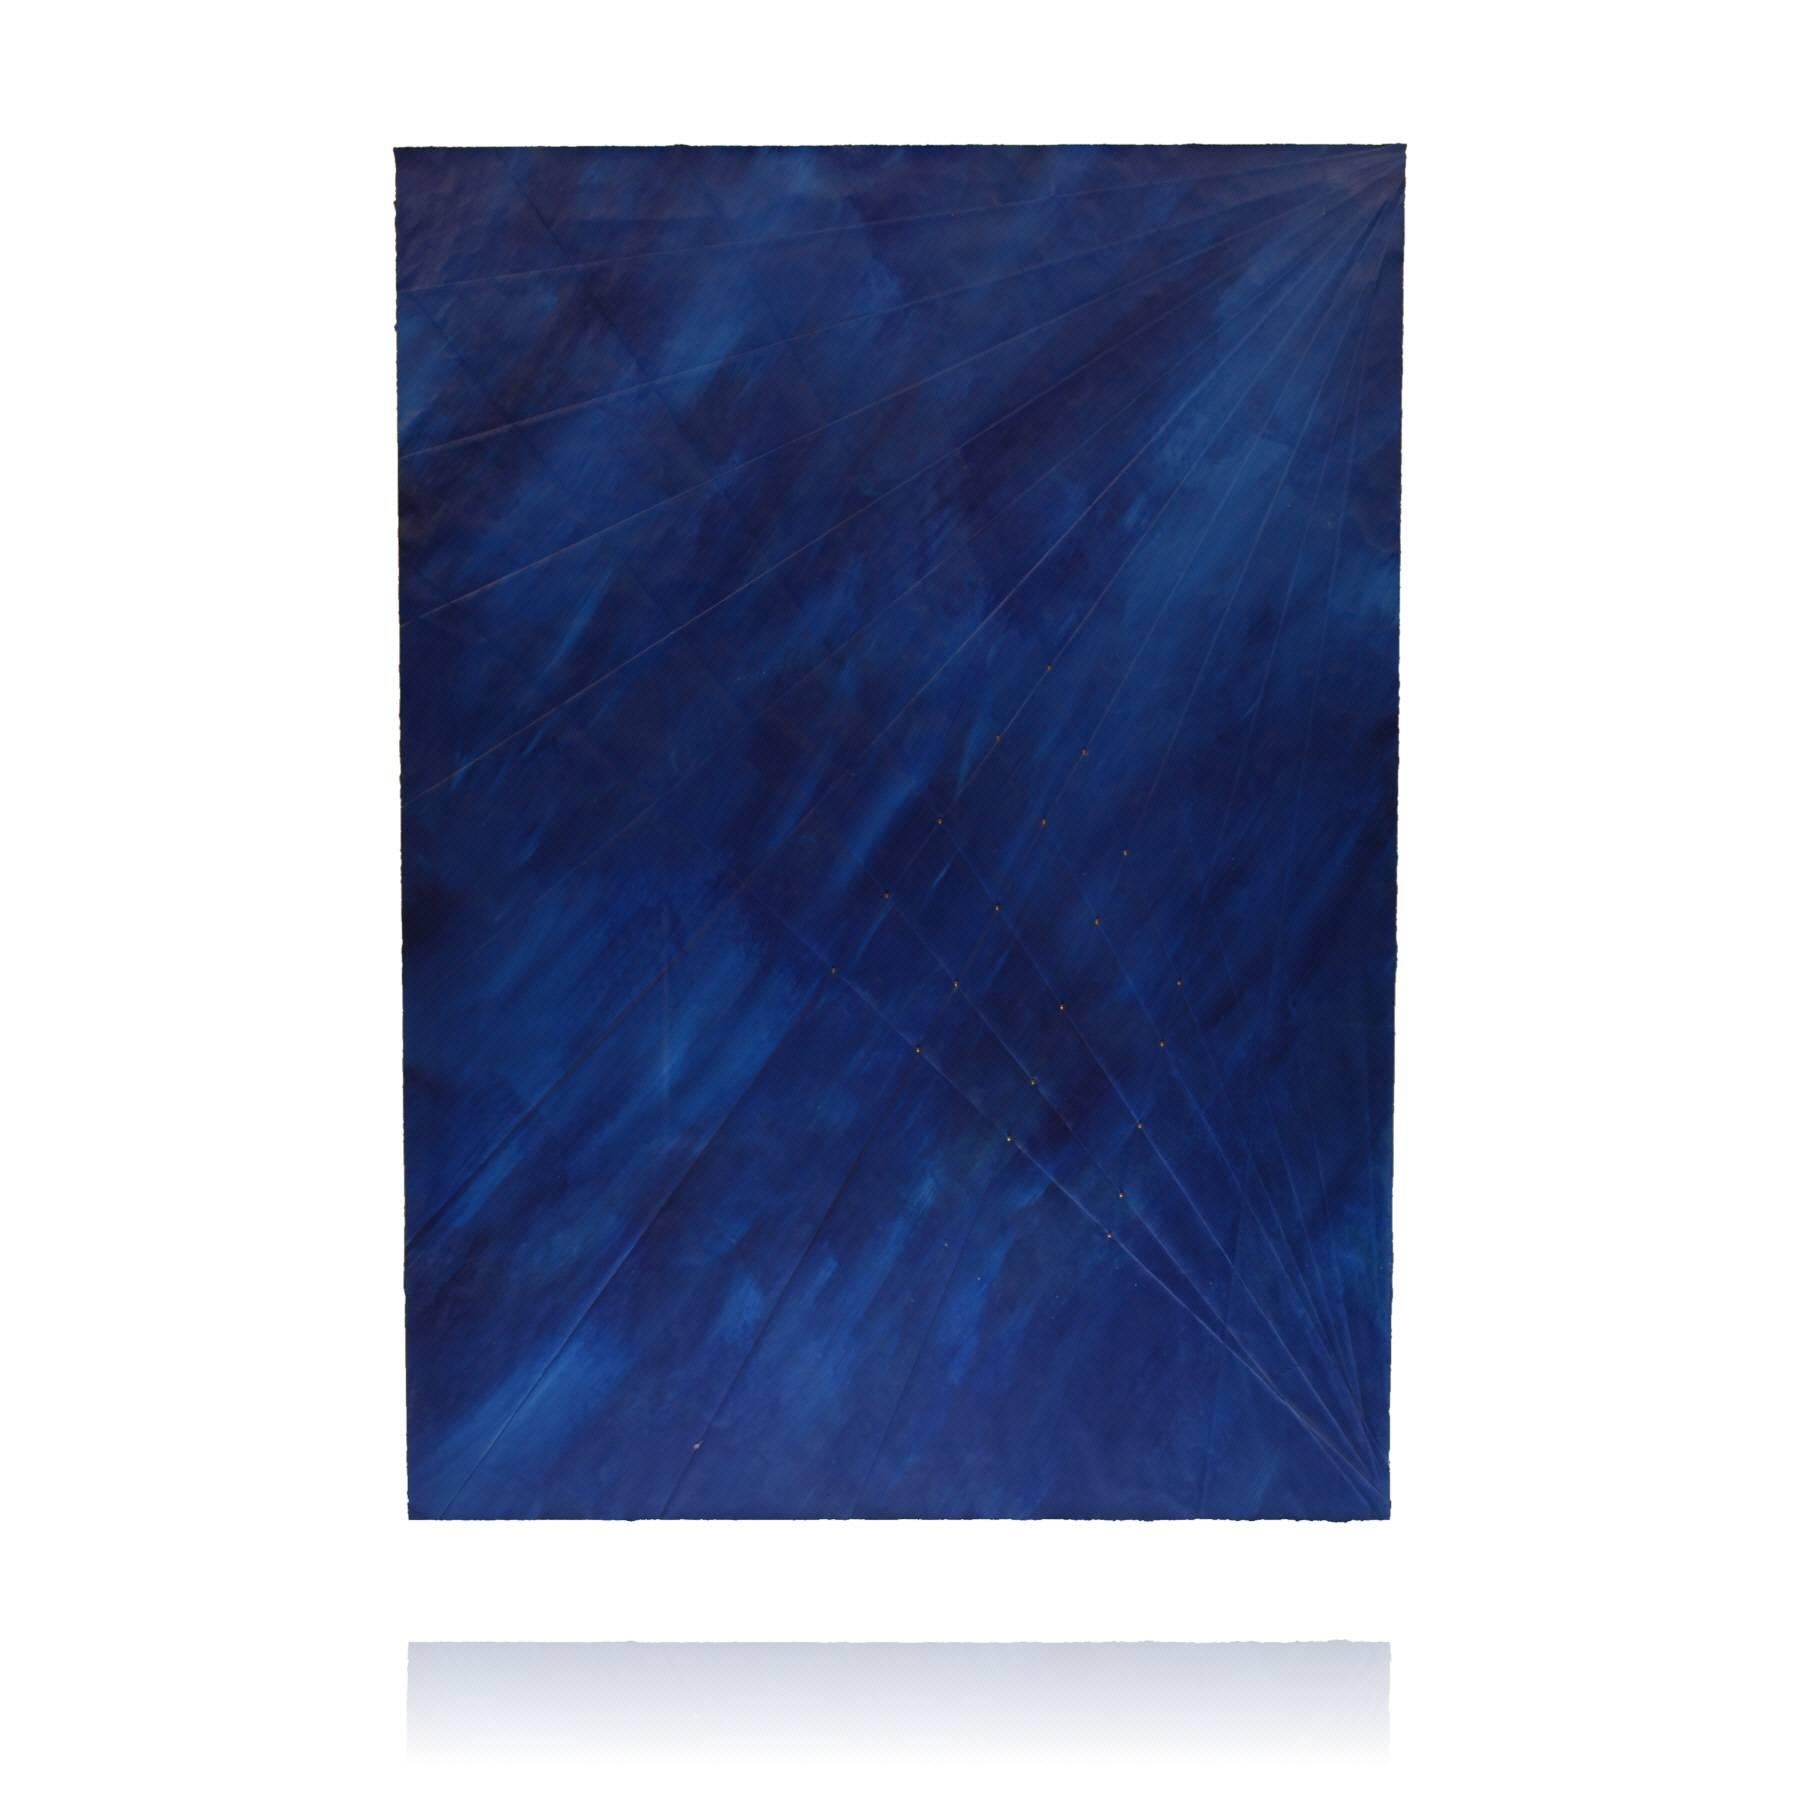 Stunning deep blue painting on paper by artist Harris G. Strong (1920-2006). Titled “Sapphire��” the painting was done on folded and scored paper, giving it a subtle grid like pattern. Some of the intersecting lines are mounted with what appears to be